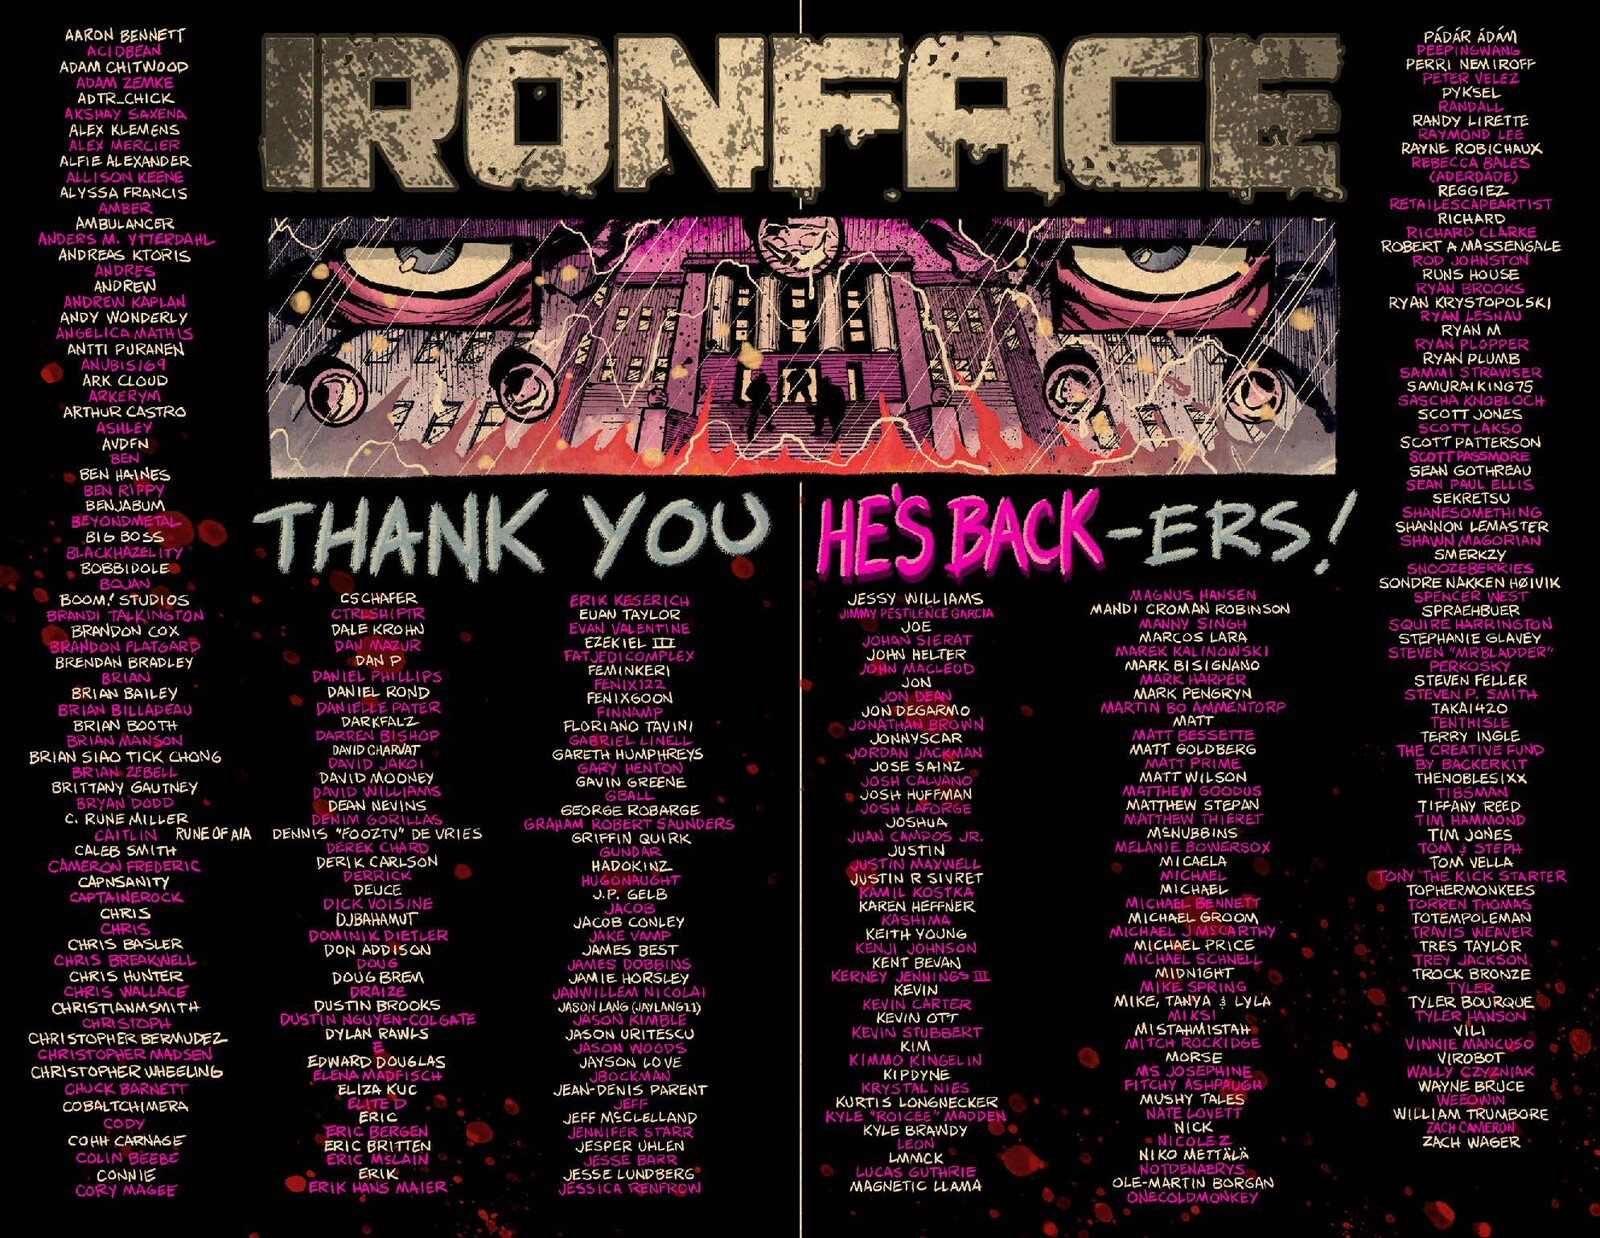 Ironface Issue 1 Thank You Page
Pencils, Inks, Colors, and Design by Ian Chase Nichols